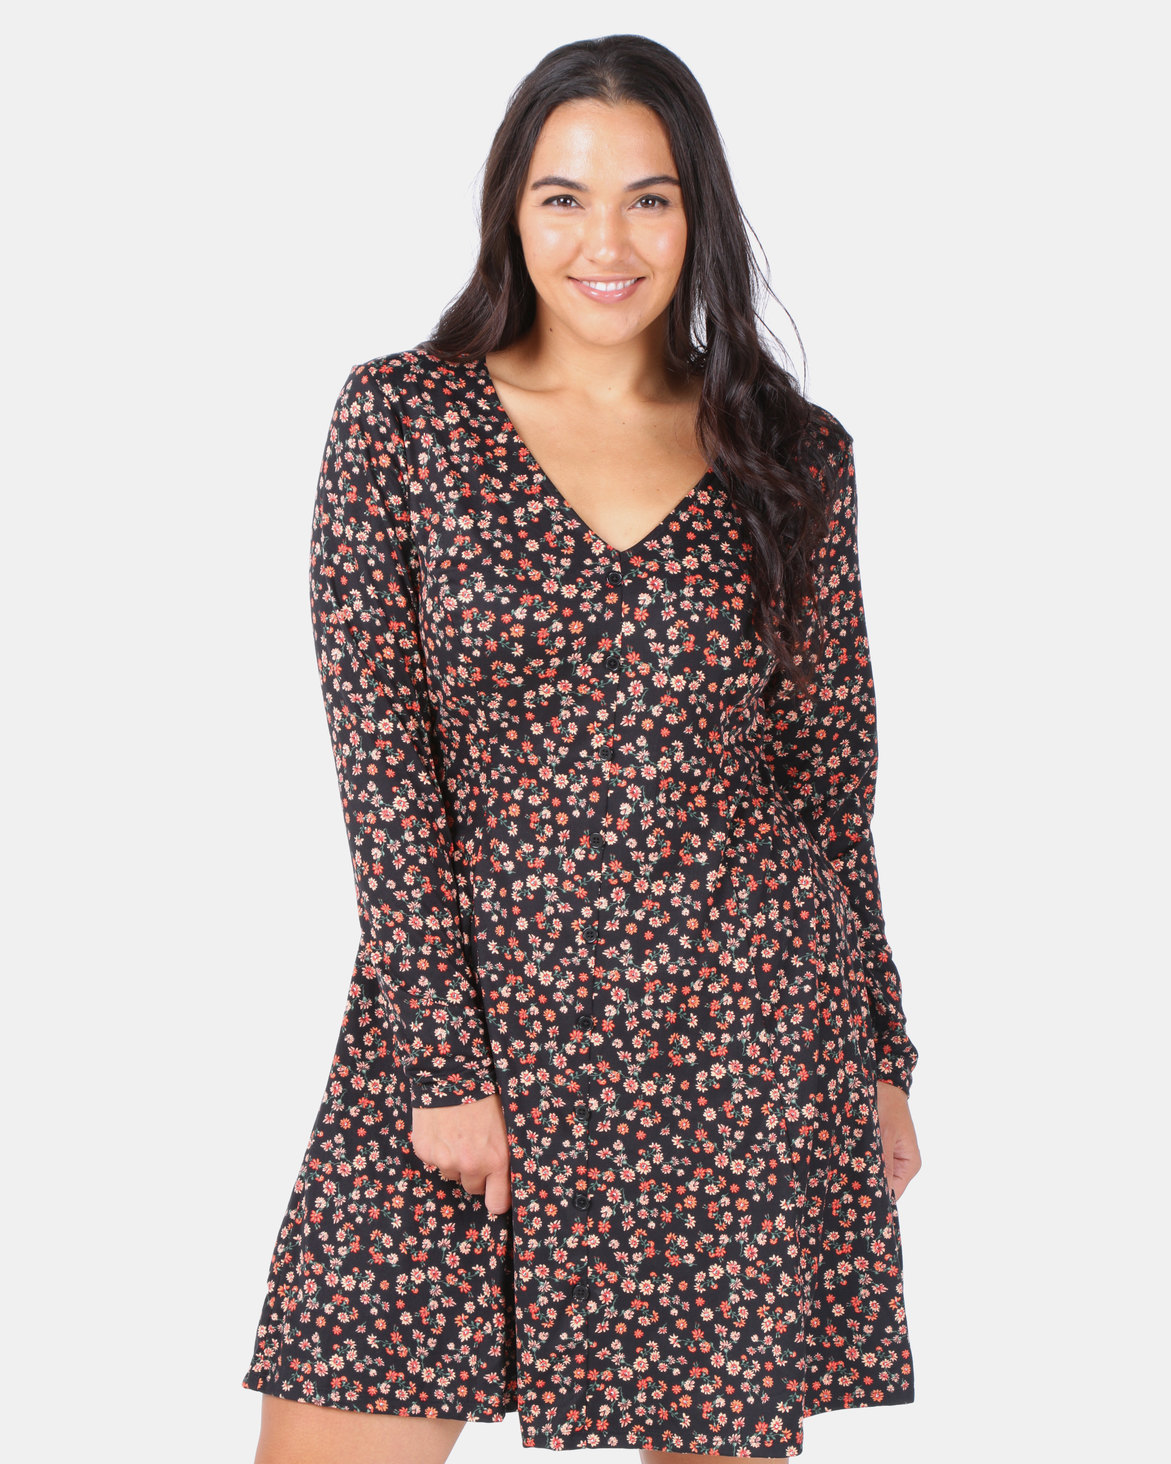 New Look Curves Long Sleeve Soft Touch Dress Black Floral Zando 